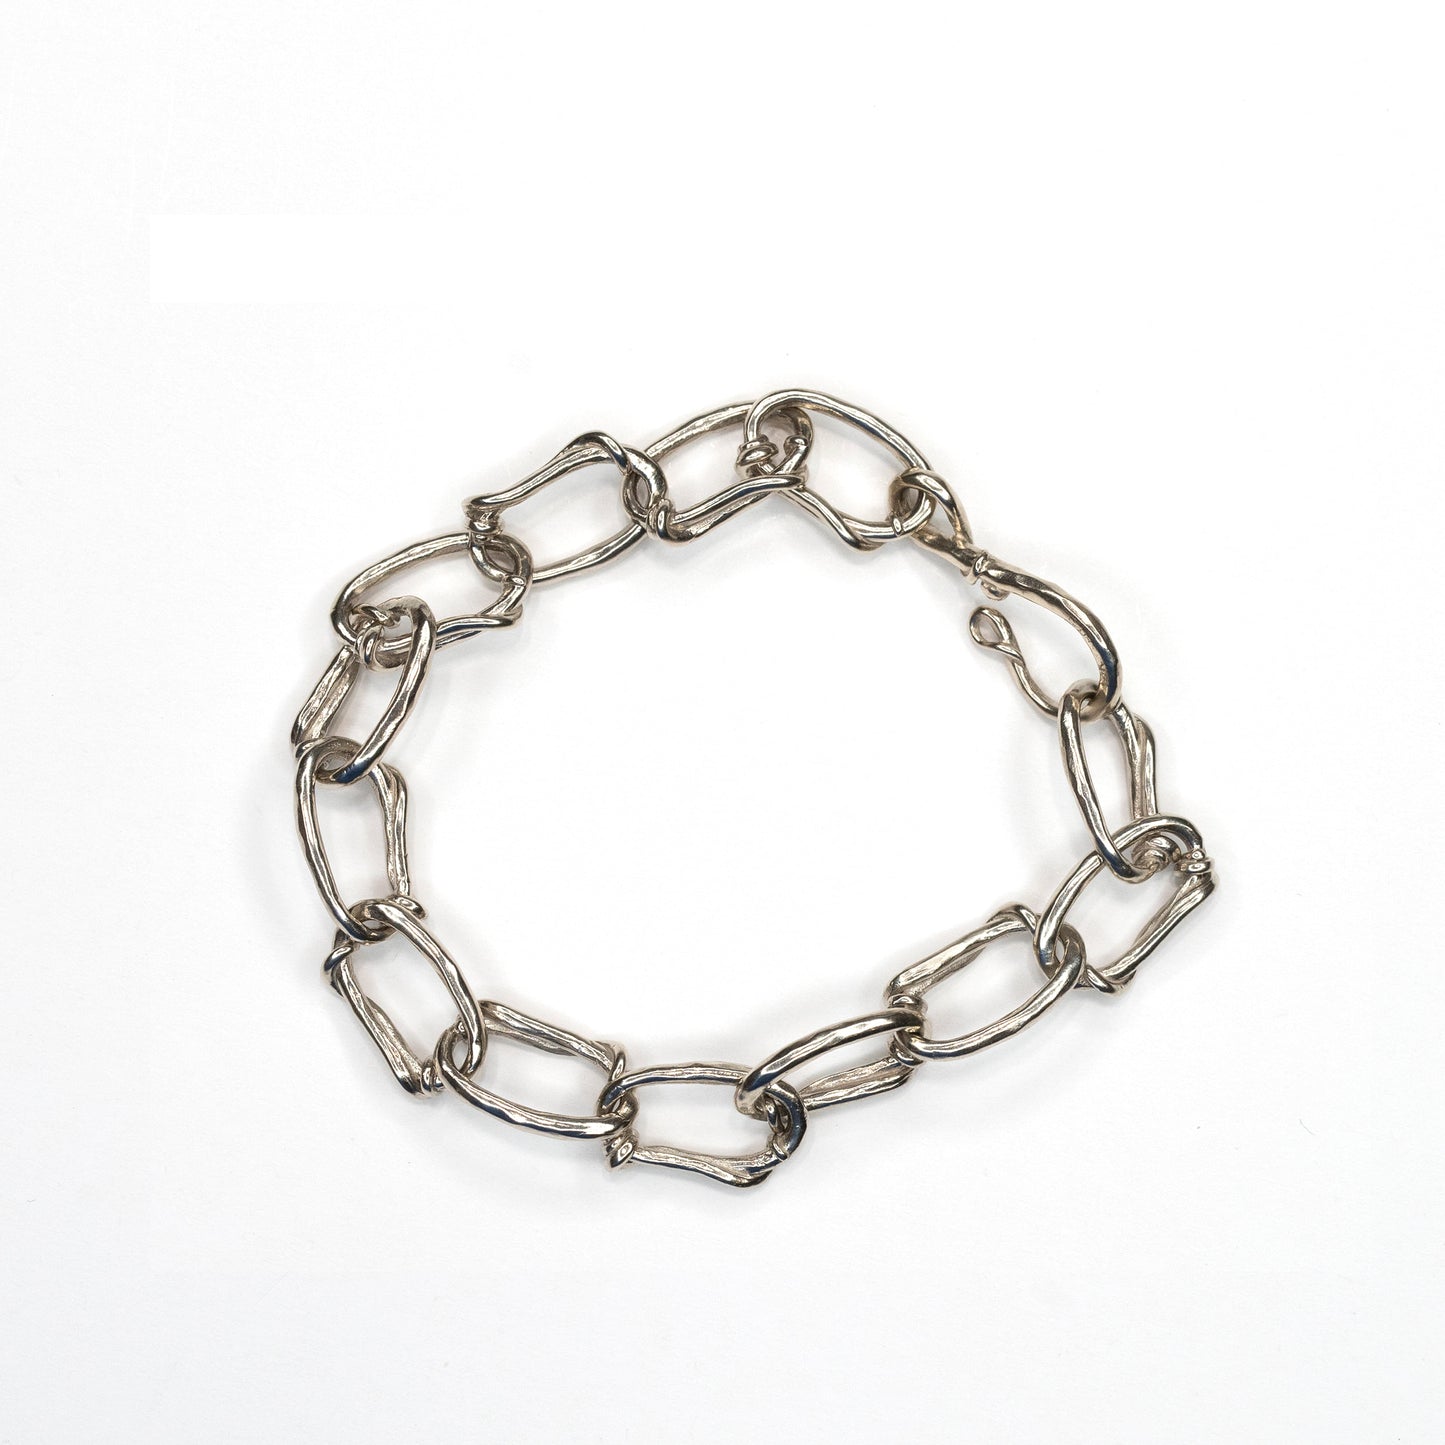 14k Oval Link Chunky Chain Yellow or White Gold Bracelet